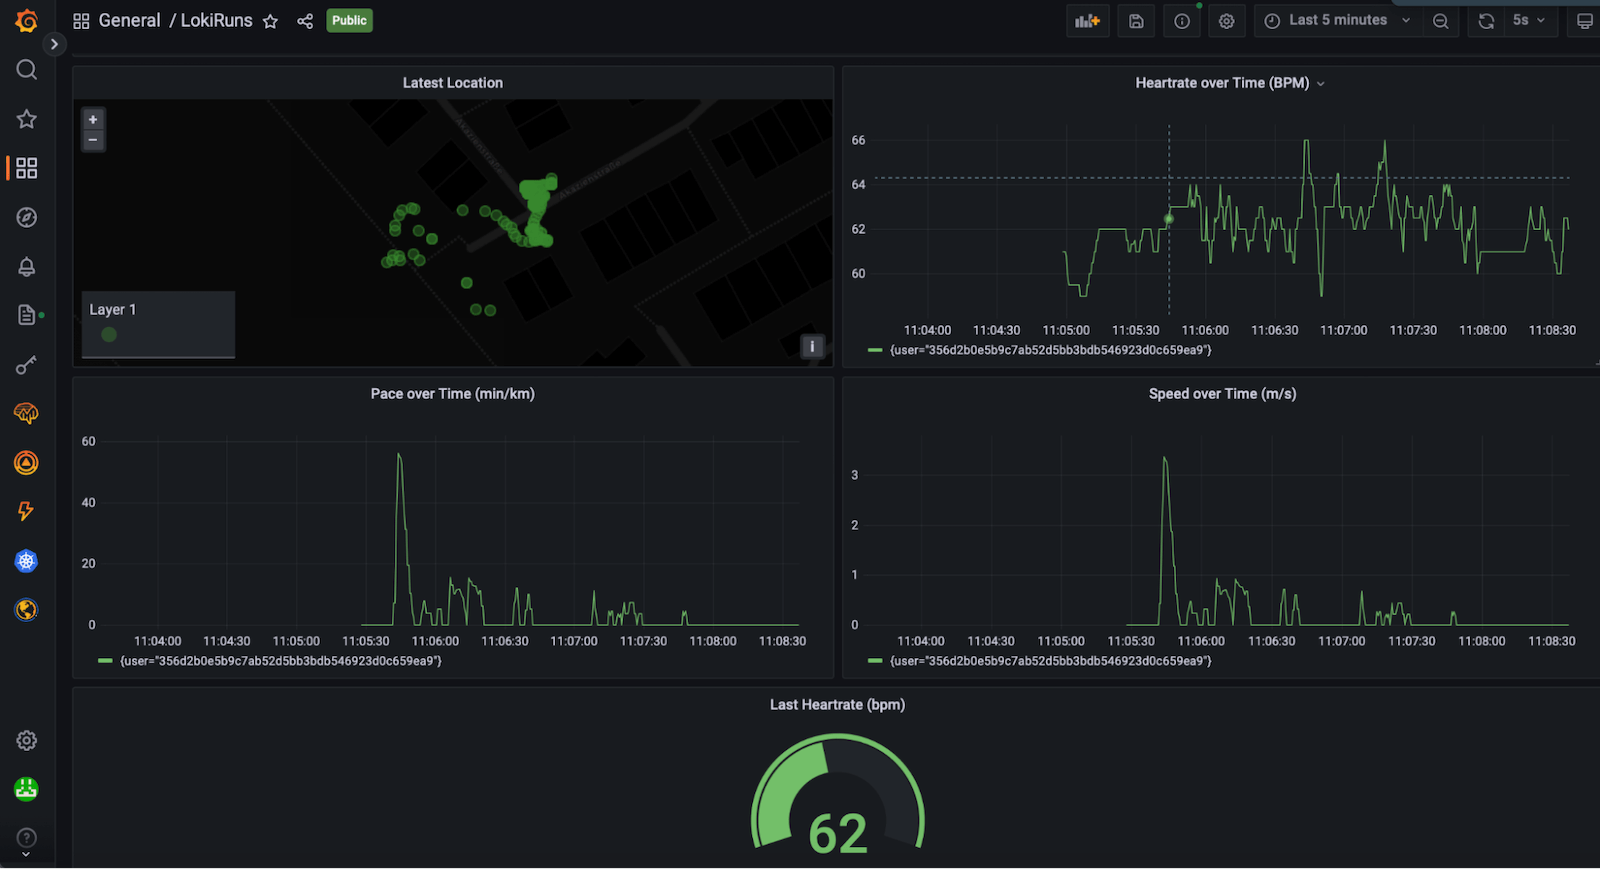 A Grafana dashboard showing running metrics from a Garmin sport watch, including heart rate and pace over time